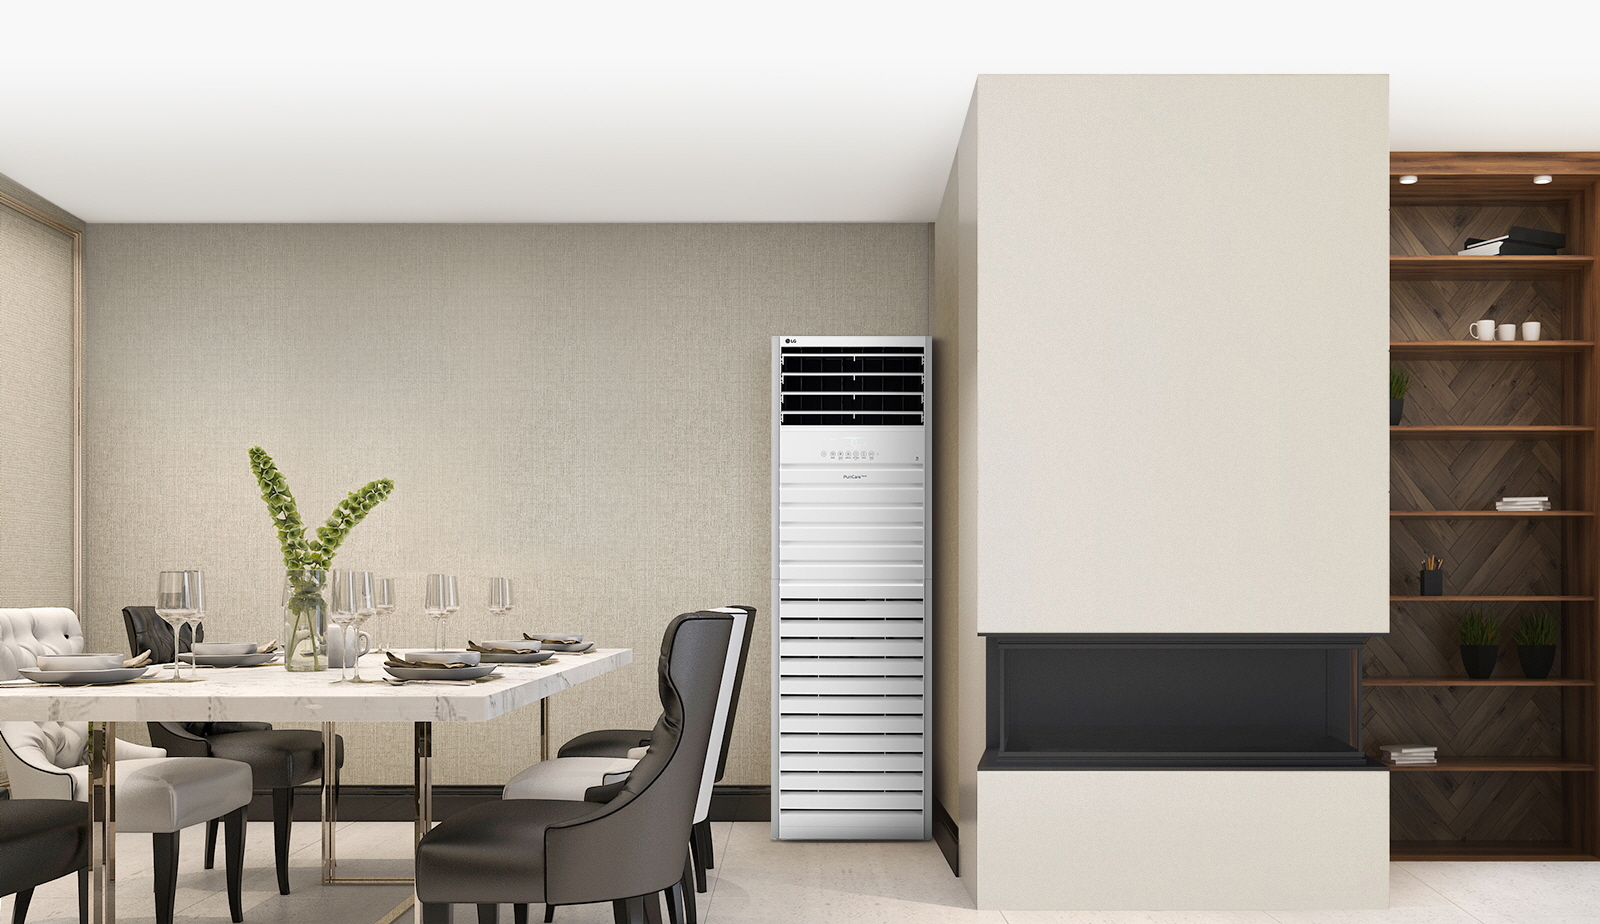 LG’s commercial air purifier in the corner of a restaurant